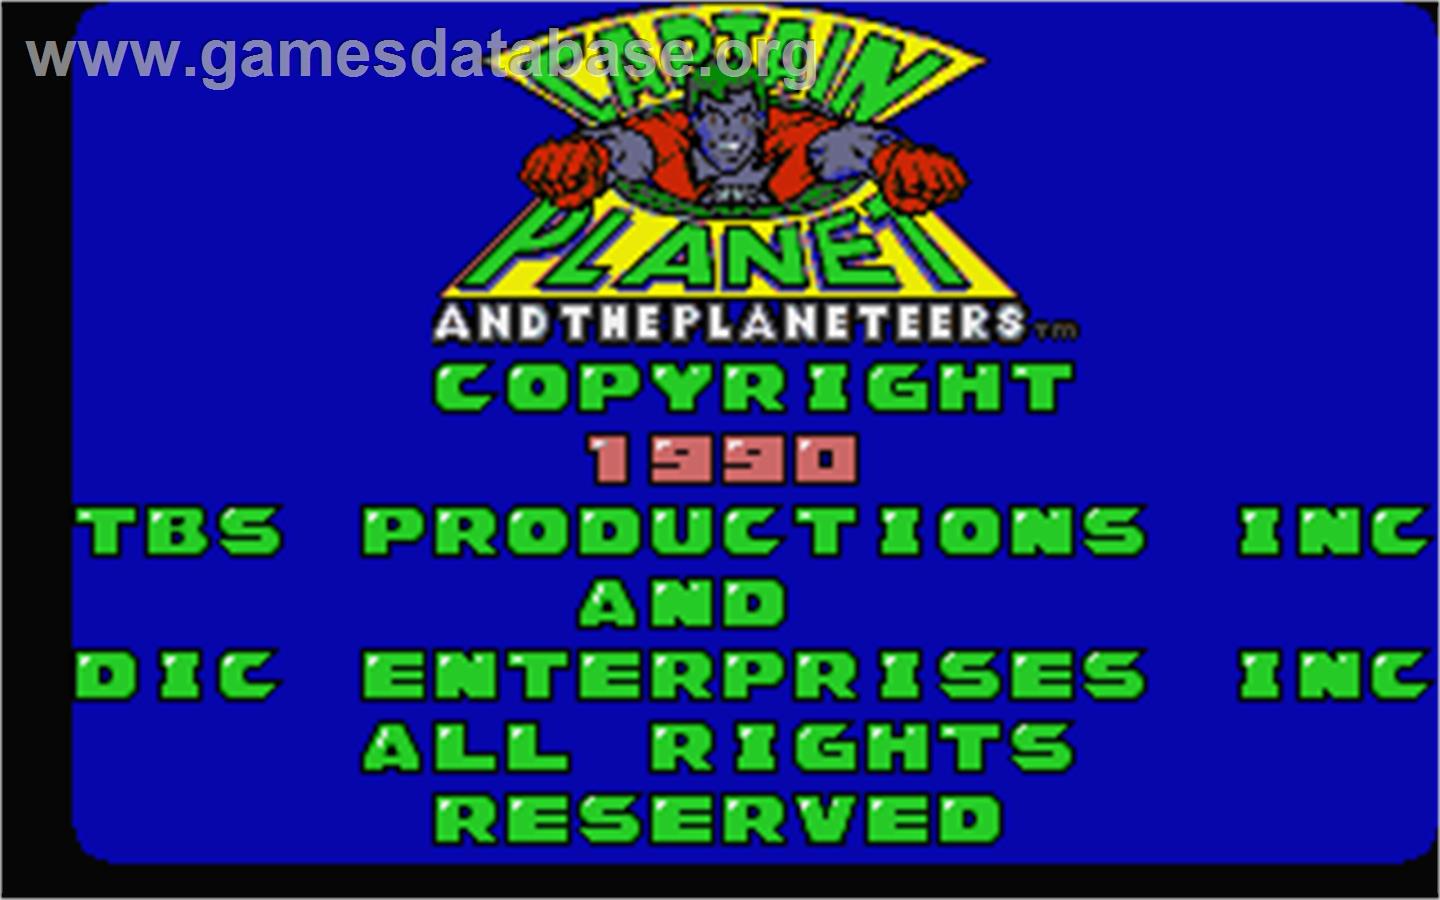 Captain Planet and the Planeteers - Atari ST - Artwork - Title Screen